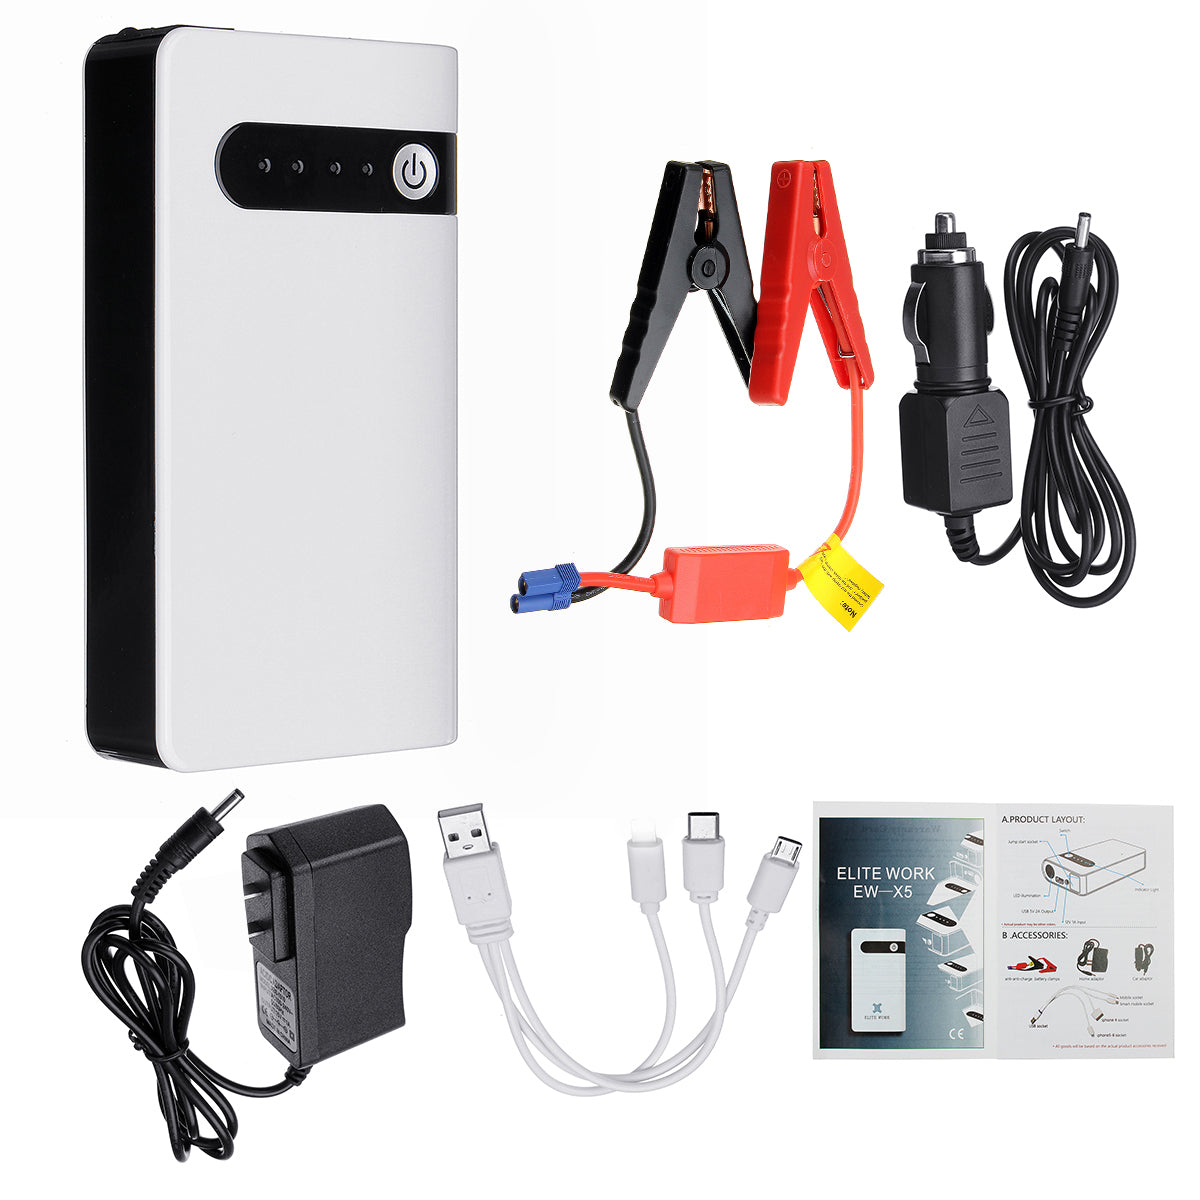 11000mAh 12V Portable Car Jump Starter Emergency Battery Booster Powerbank Waterproof with LED Flashlight 3-In-1 USB Port - Auto GoShop